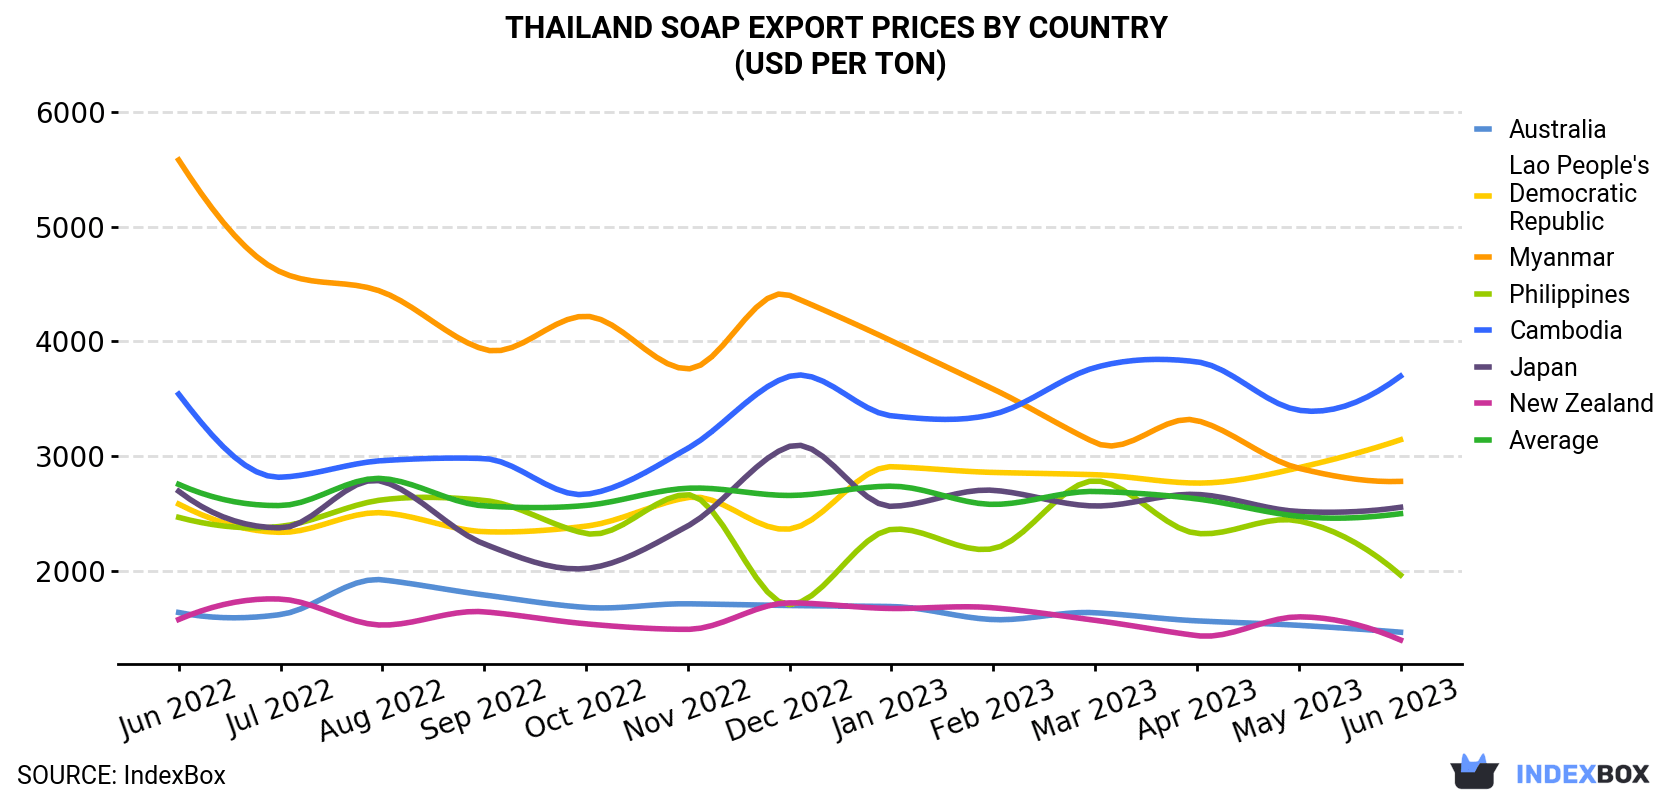 Thailand Soap Export Prices By Country (USD Per Ton)